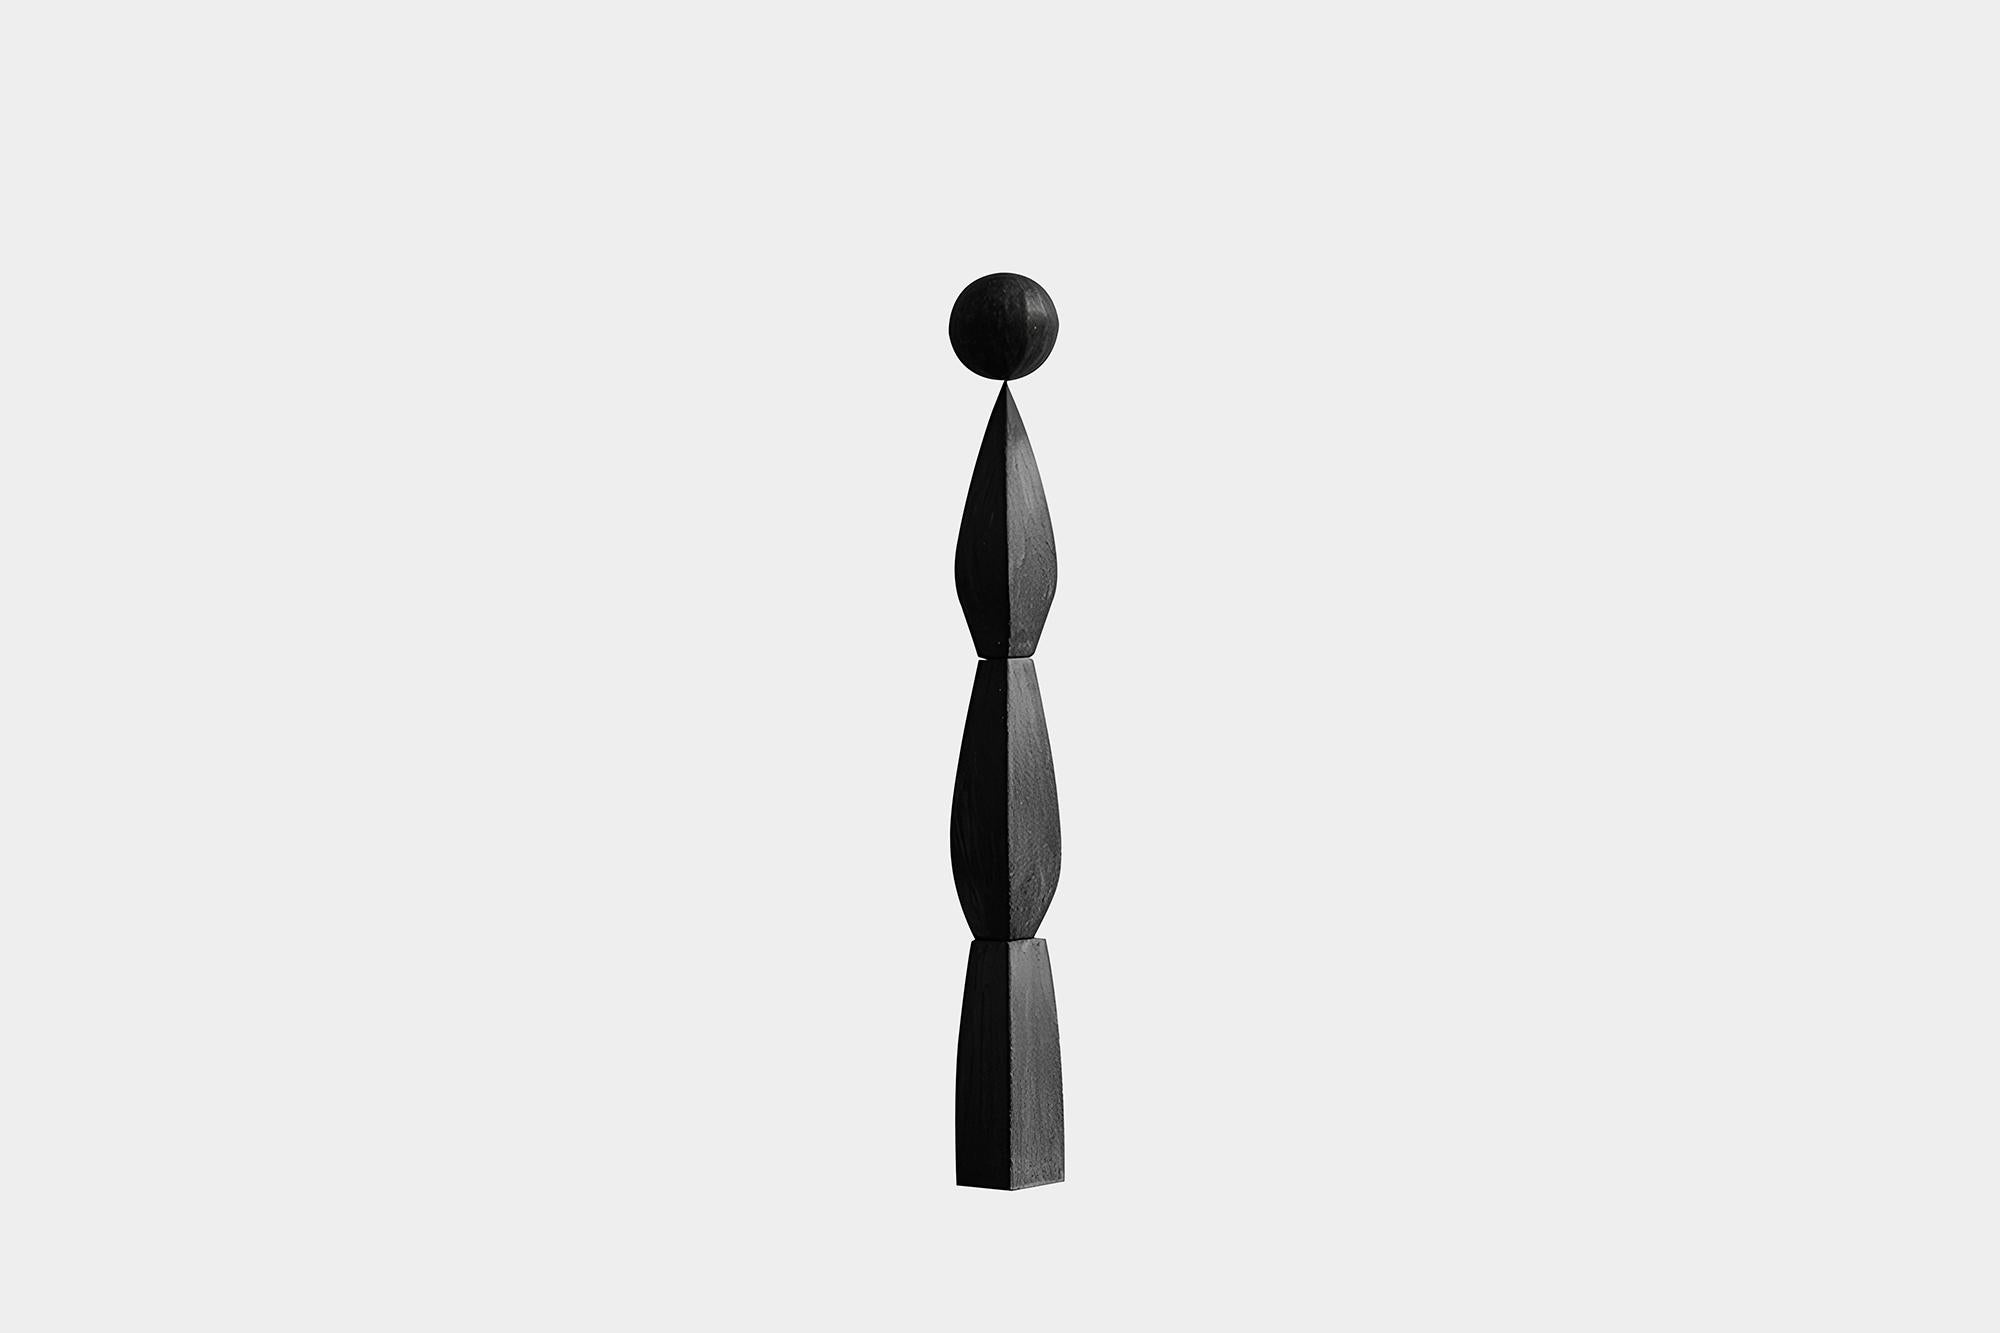 Sleek Black Solid Wood Sculpture, NONO's Art, Still Stand No82



Joel Escalona's wooden standing sculptures are objects of raw beauty and serene grace. Each one is a testament to the power of the material, with smooth curves that flow into one